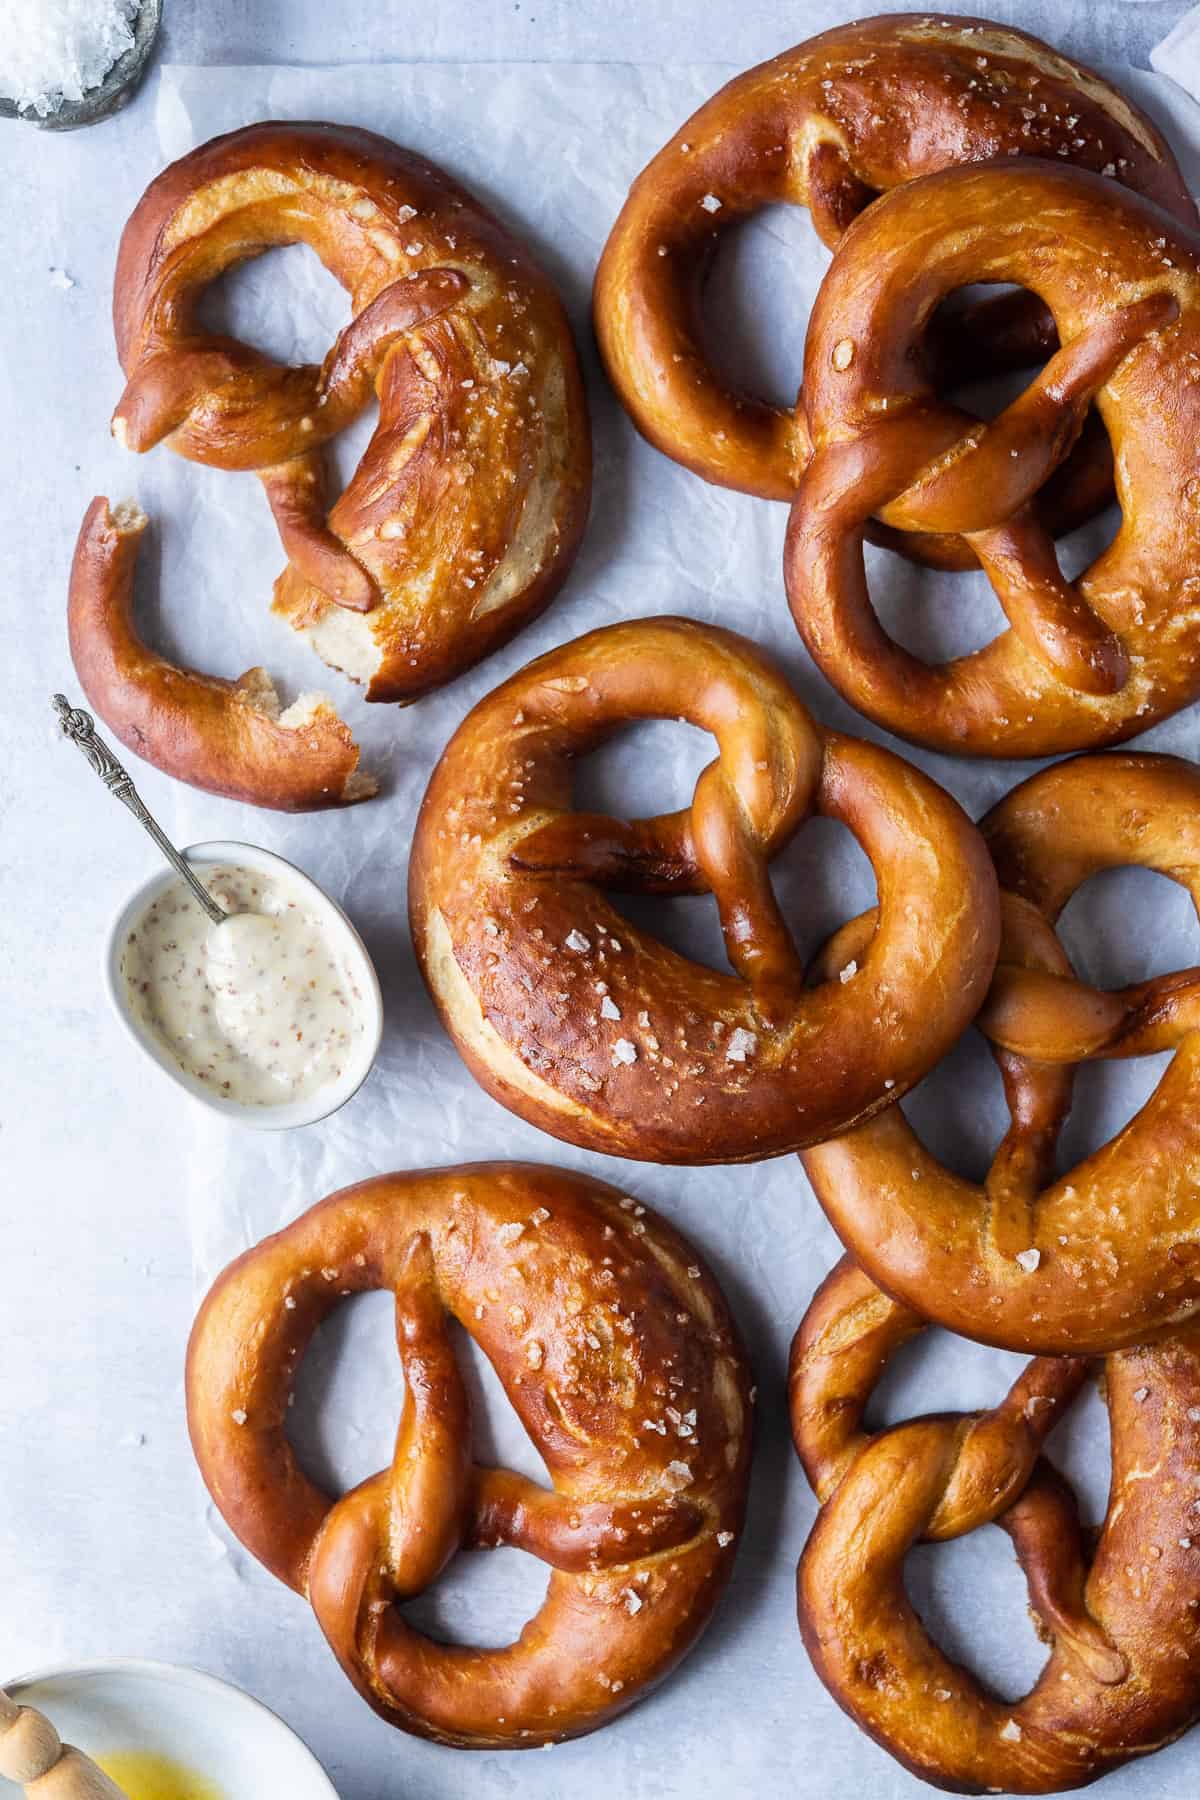 Vegan beer pretzels on a sheet of white baking parchment with a bowl of mustard sauce.